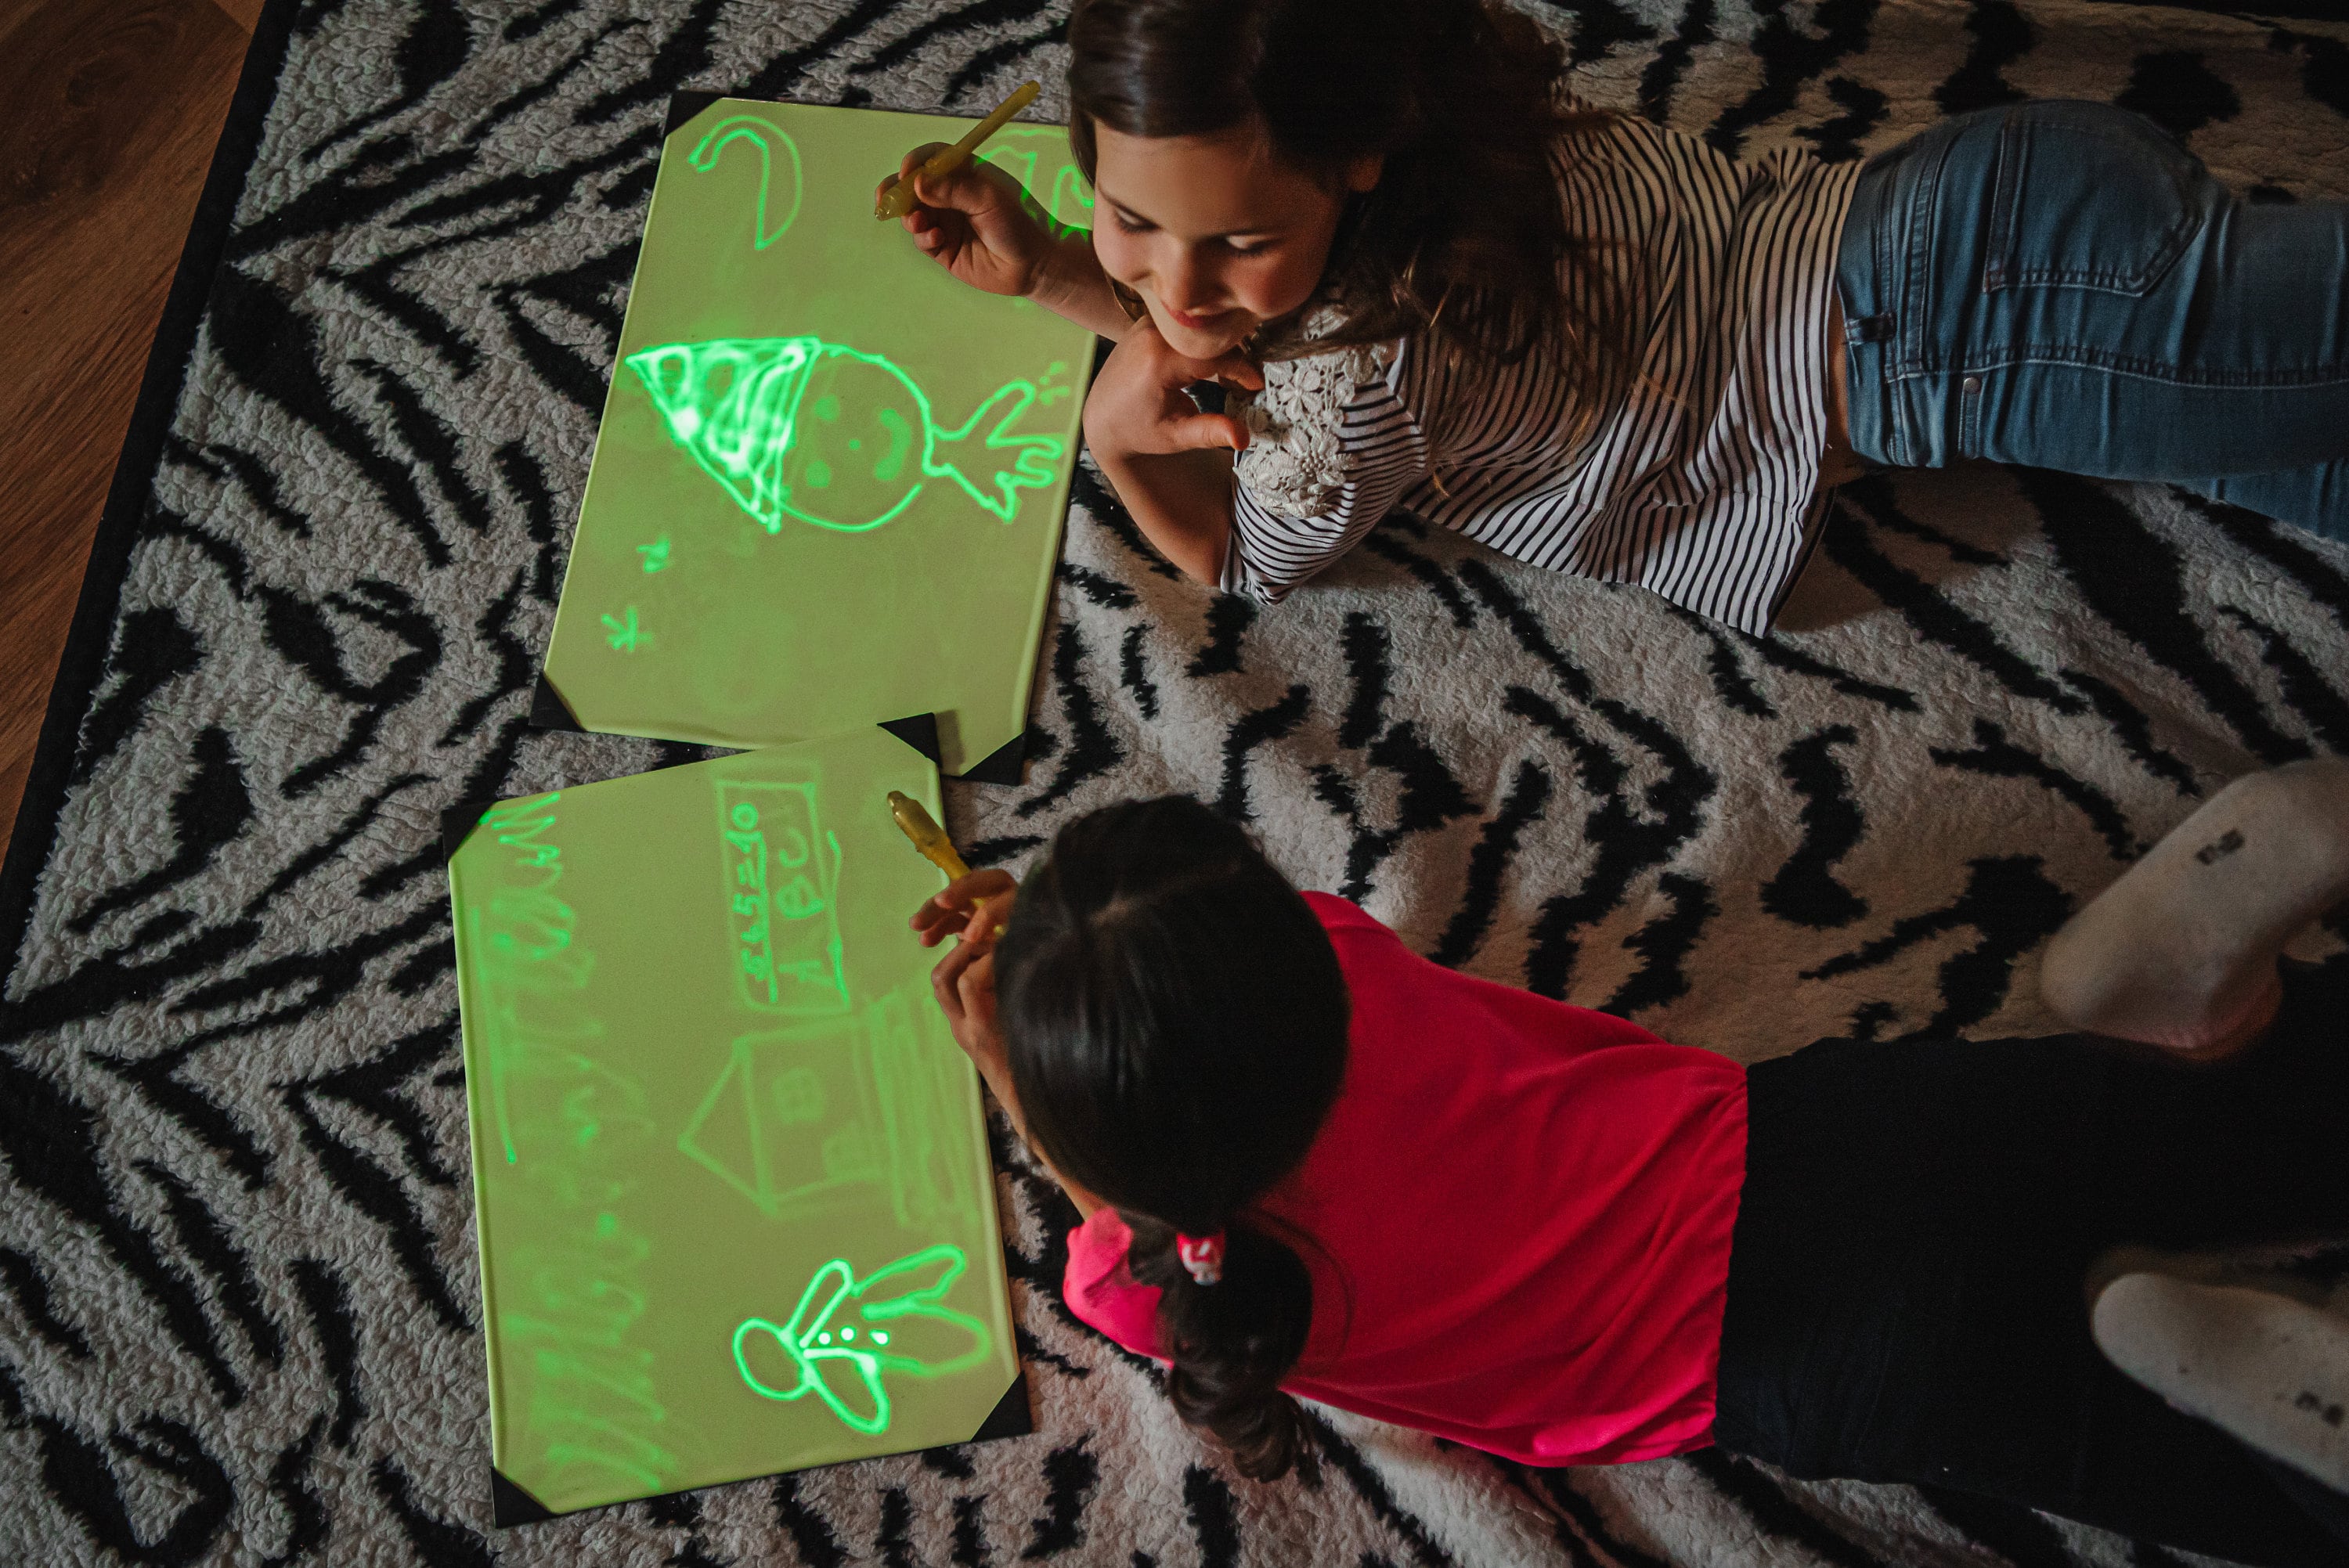 KIDS MAGIC DRAWING Board Pad 3D LED Light Up Doodle Glow + Paintbrush For  Gift £11.59 - PicClick UK